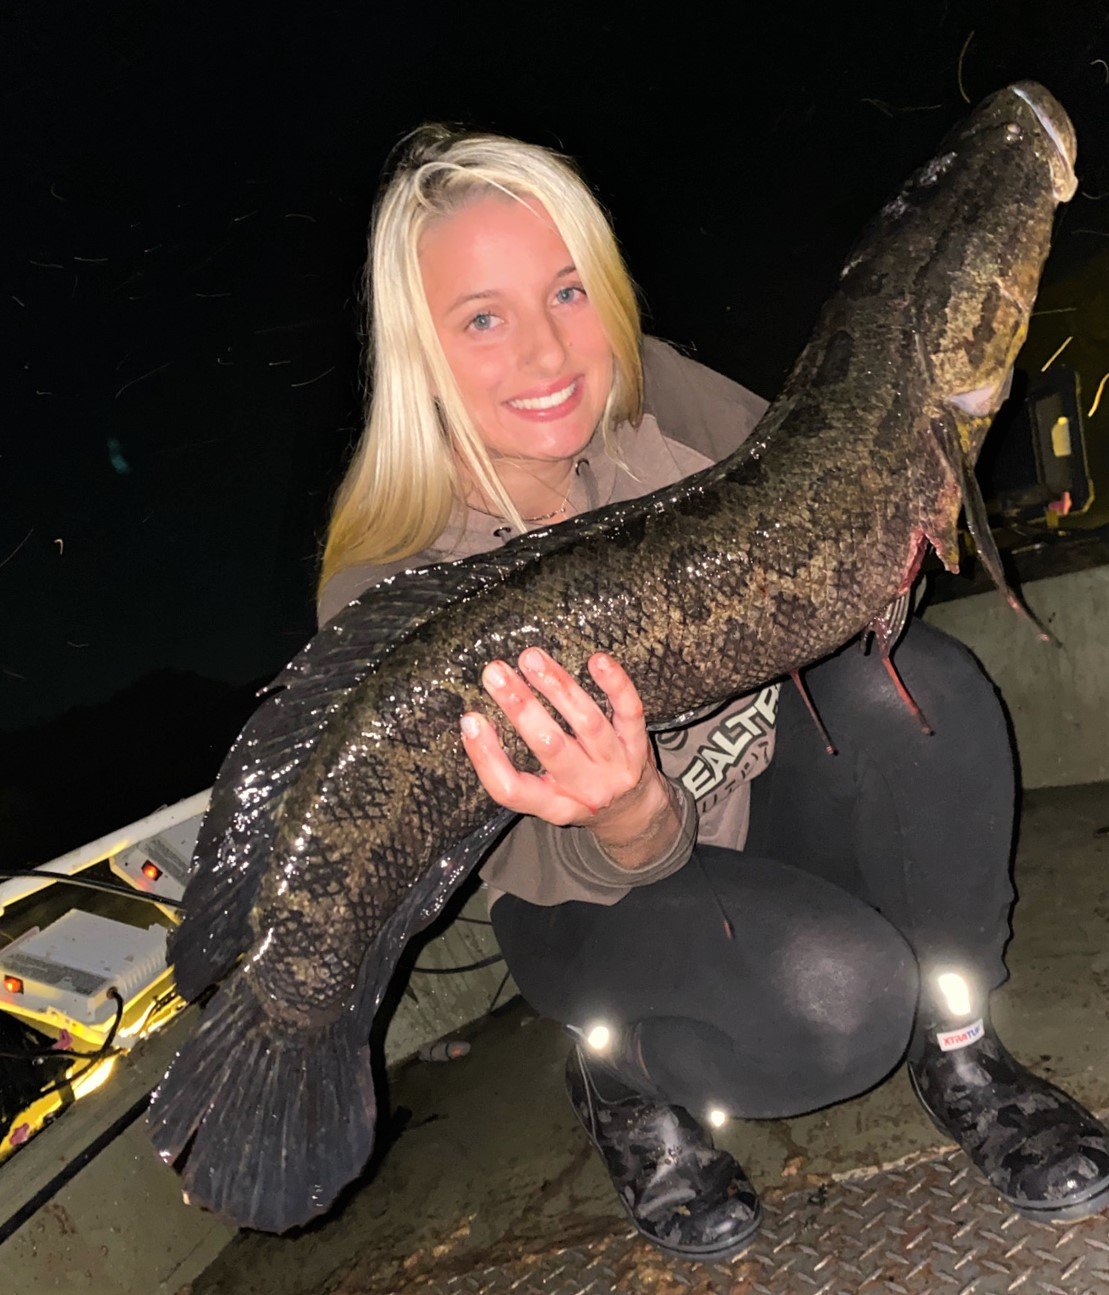 BAF - Jessica Mcavoy Snakehead 4 - cleanest at night (2).jpeg